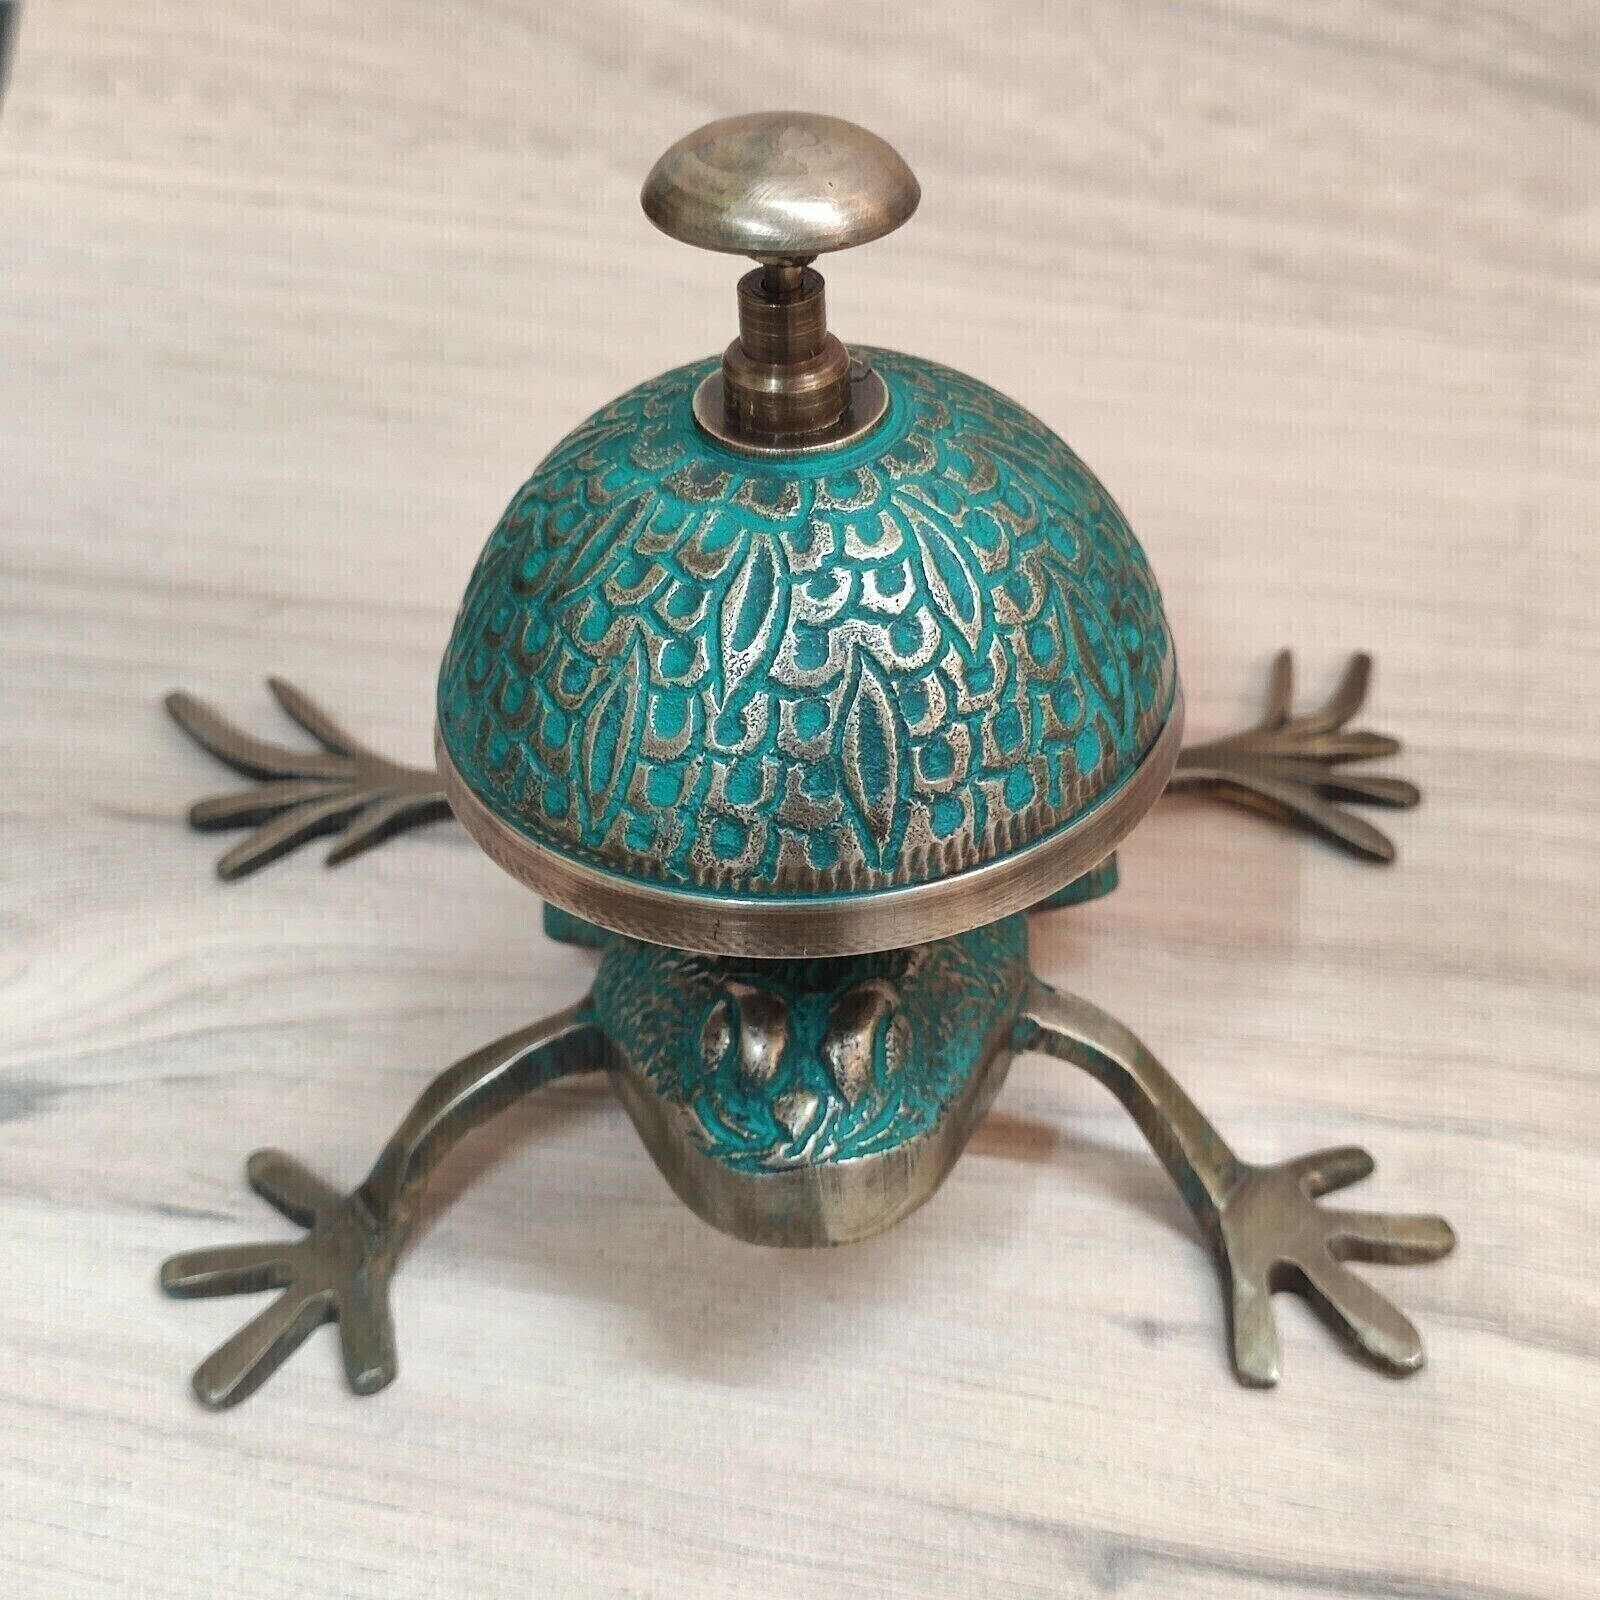 Exquisite Handmade Antique Frog Design Brass Vintage Counter Desk Bell with Push